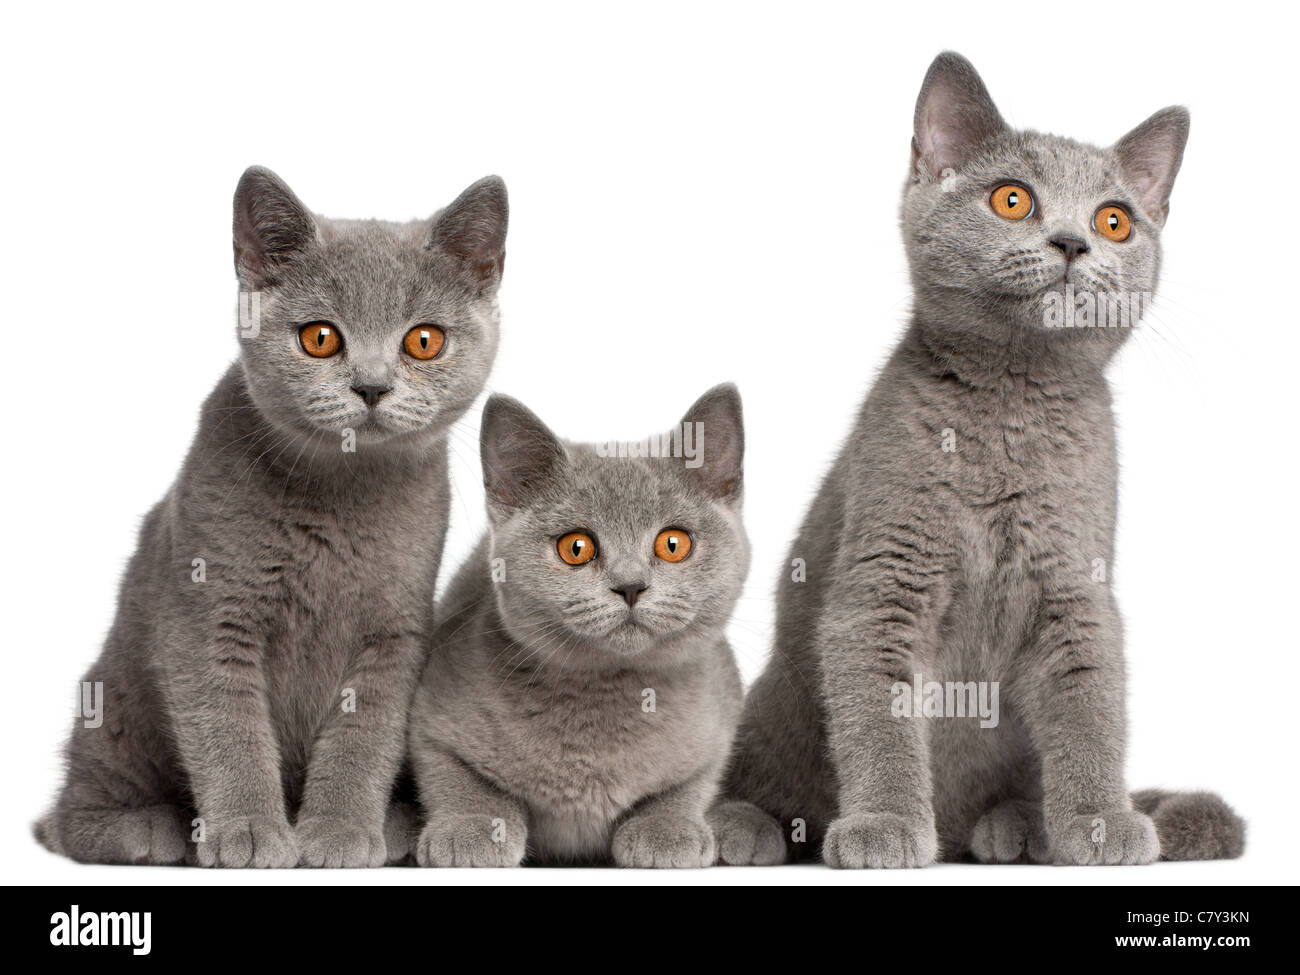 British Shorthair kittens, 3 months old, in front of white background Stock Photo